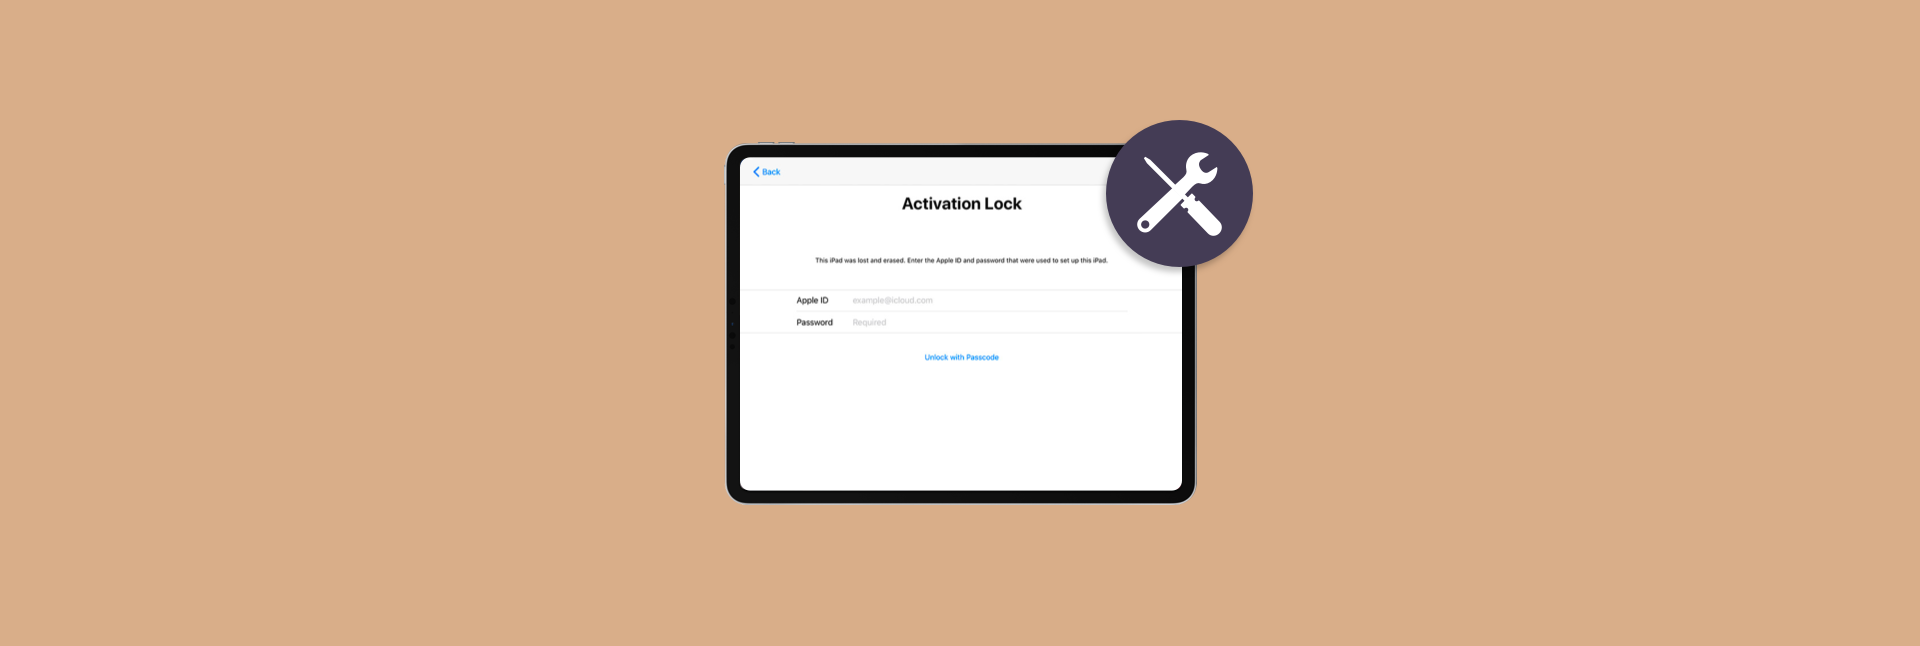 How To Bypass Activation Lock On Ipad Iphone The Right Way